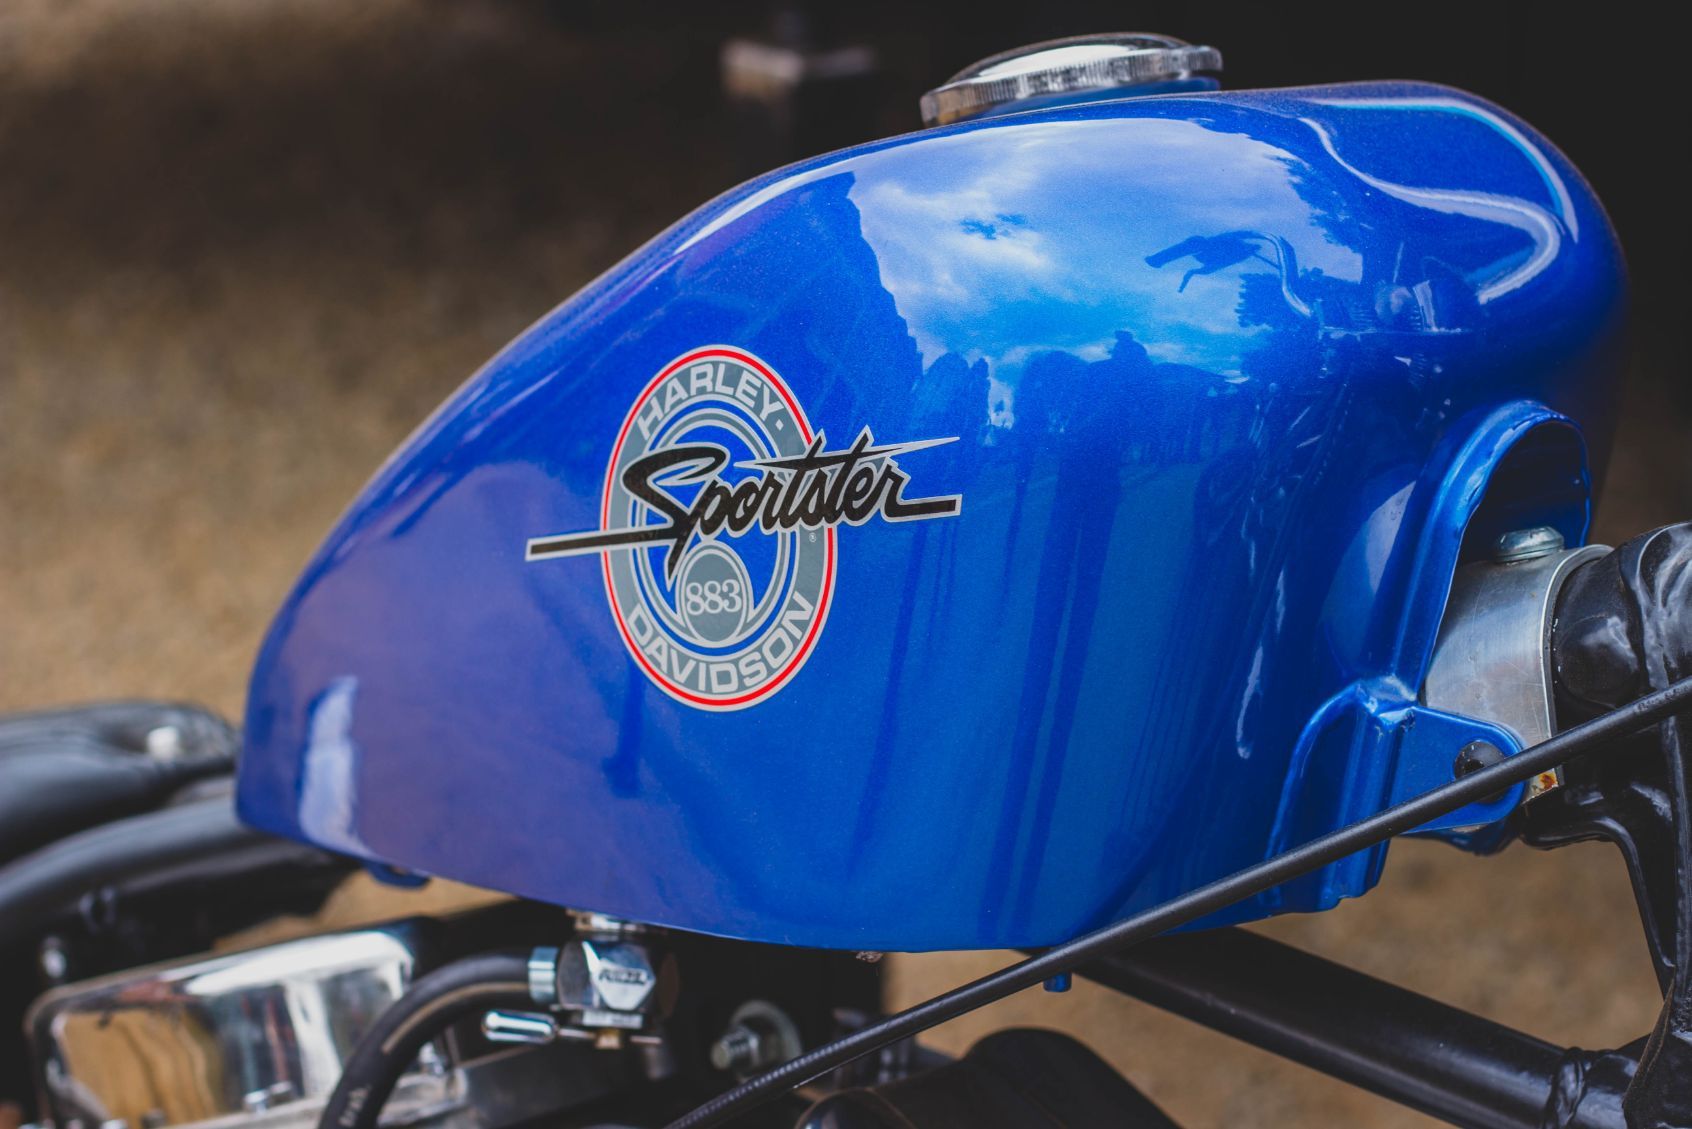 Sticker Signage In Motorcycle — Sign Shop In Paget, QLD